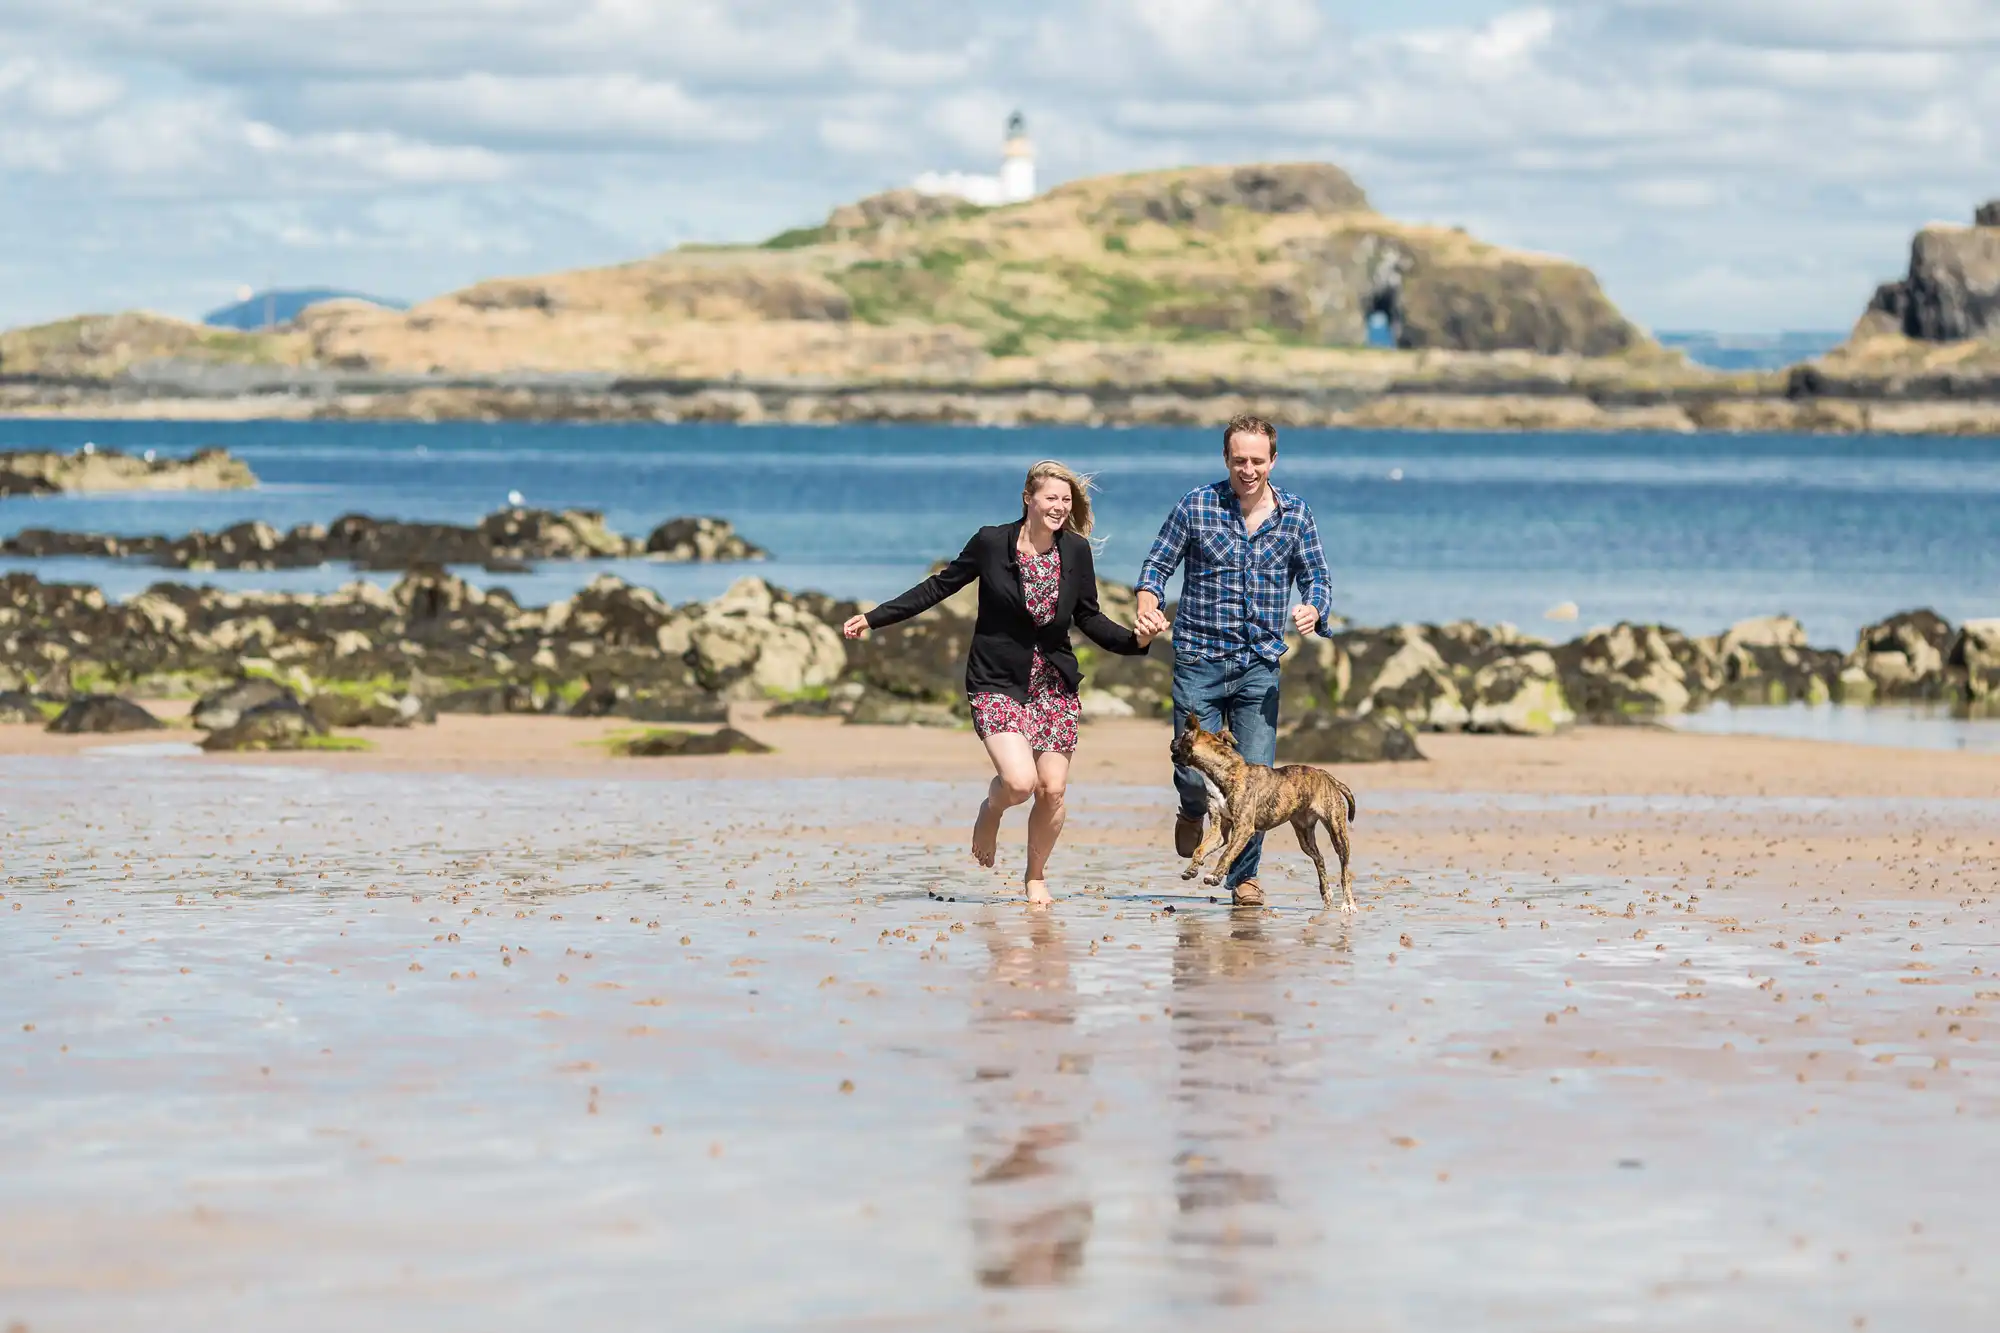 A couple runs joyfully on a sandy beach with their dog, with a lighthouse on a distant island and blue sky with clouds in the background.